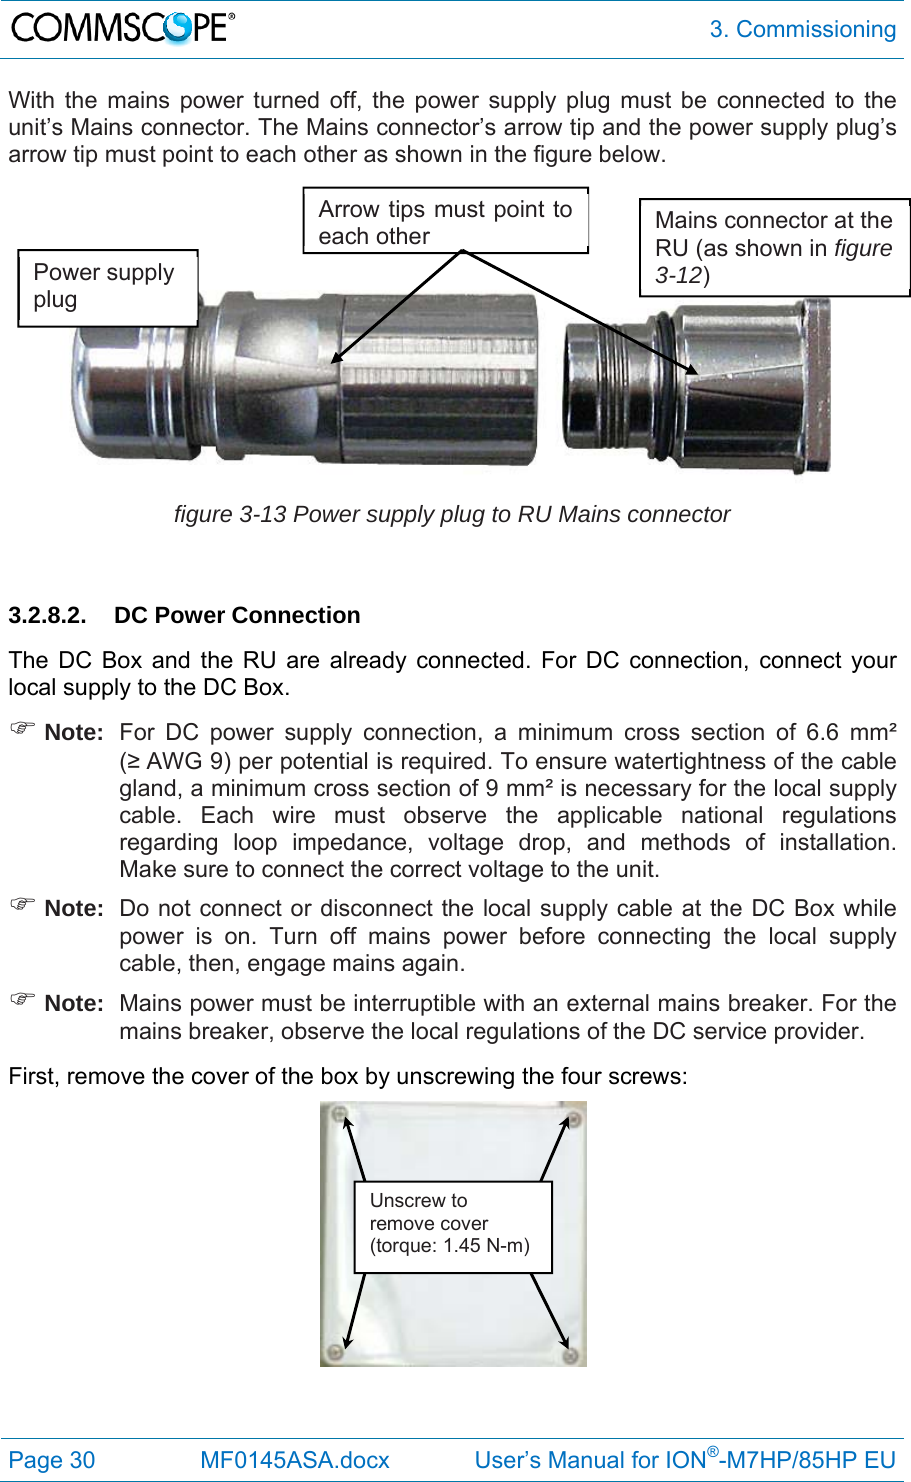  3. Commissioning Page 30  MF0145ASA.docx             User’s Manual for ION®-M7HP/85HP EU With the mains power turned off, the power supply plug must be connected to the unit’s Mains connector. The Mains connector’s arrow tip and the power supply plug’s arrow tip must point to each other as shown in the figure below.     figure 3-13 Power supply plug to RU Mains connector  3.2.8.2. DC Power Connection The DC Box and the RU are already connected. For DC connection, connect your local supply to the DC Box.  Note:  For DC power supply connection, a minimum cross section of 6.6 mm² (≥ AWG 9) per potential is required. To ensure watertightness of the cable gland, a minimum cross section of 9 mm² is necessary for the local supply cable. Each wire must observe the applicable national regulations regarding loop impedance, voltage drop, and methods of installation. Make sure to connect the correct voltage to the unit.  Note:  Do not connect or disconnect the local supply cable at the DC Box while power is on. Turn off mains power before connecting the local supply cable, then, engage mains again.  Note:  Mains power must be interruptible with an external mains breaker. For the mains breaker, observe the local regulations of the DC service provider. First, remove the cover of the box by unscrewing the four screws:    Power supply plug Mains connector at the RU (as shown in figure 3-12) Arrow tips must point to each otherUnscrew to remove cover (torque: 1.45 N-m) 